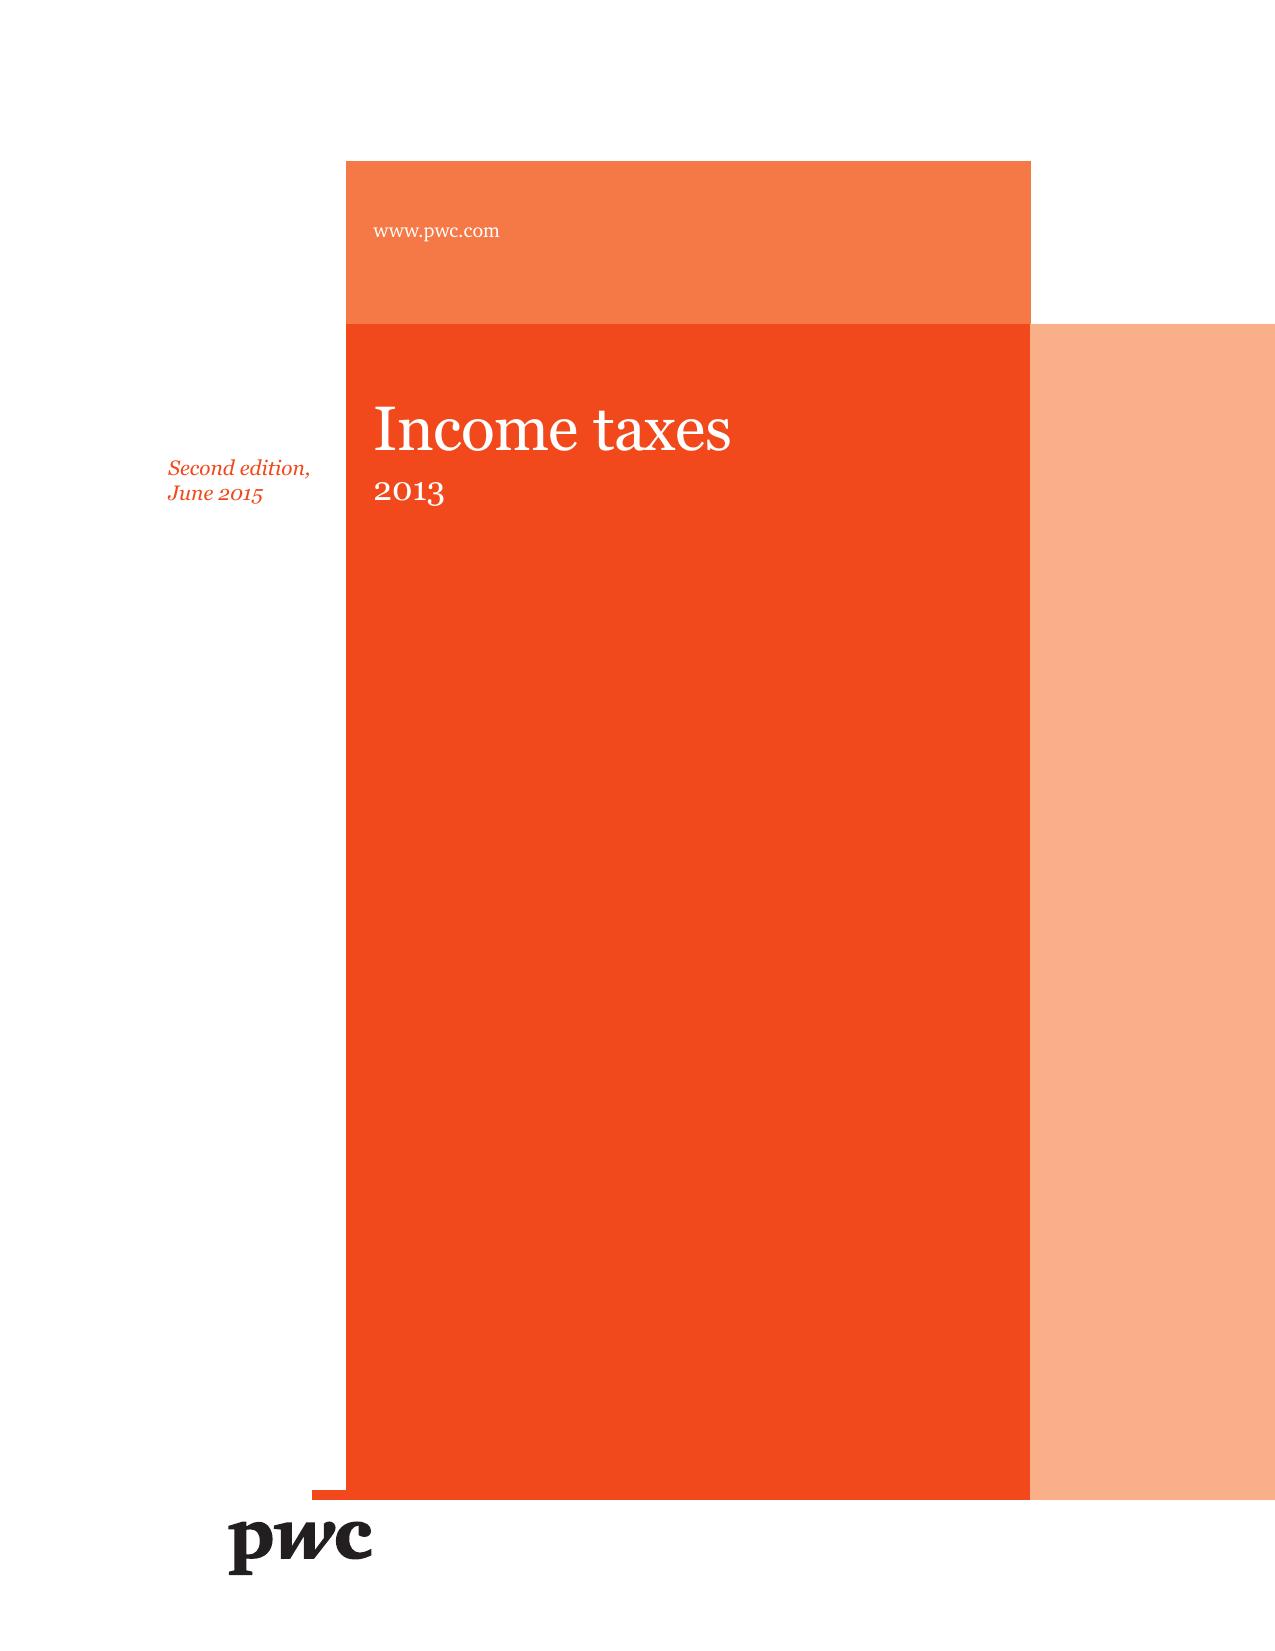 PwC's Accounting and financial reporting guide for Income taxes